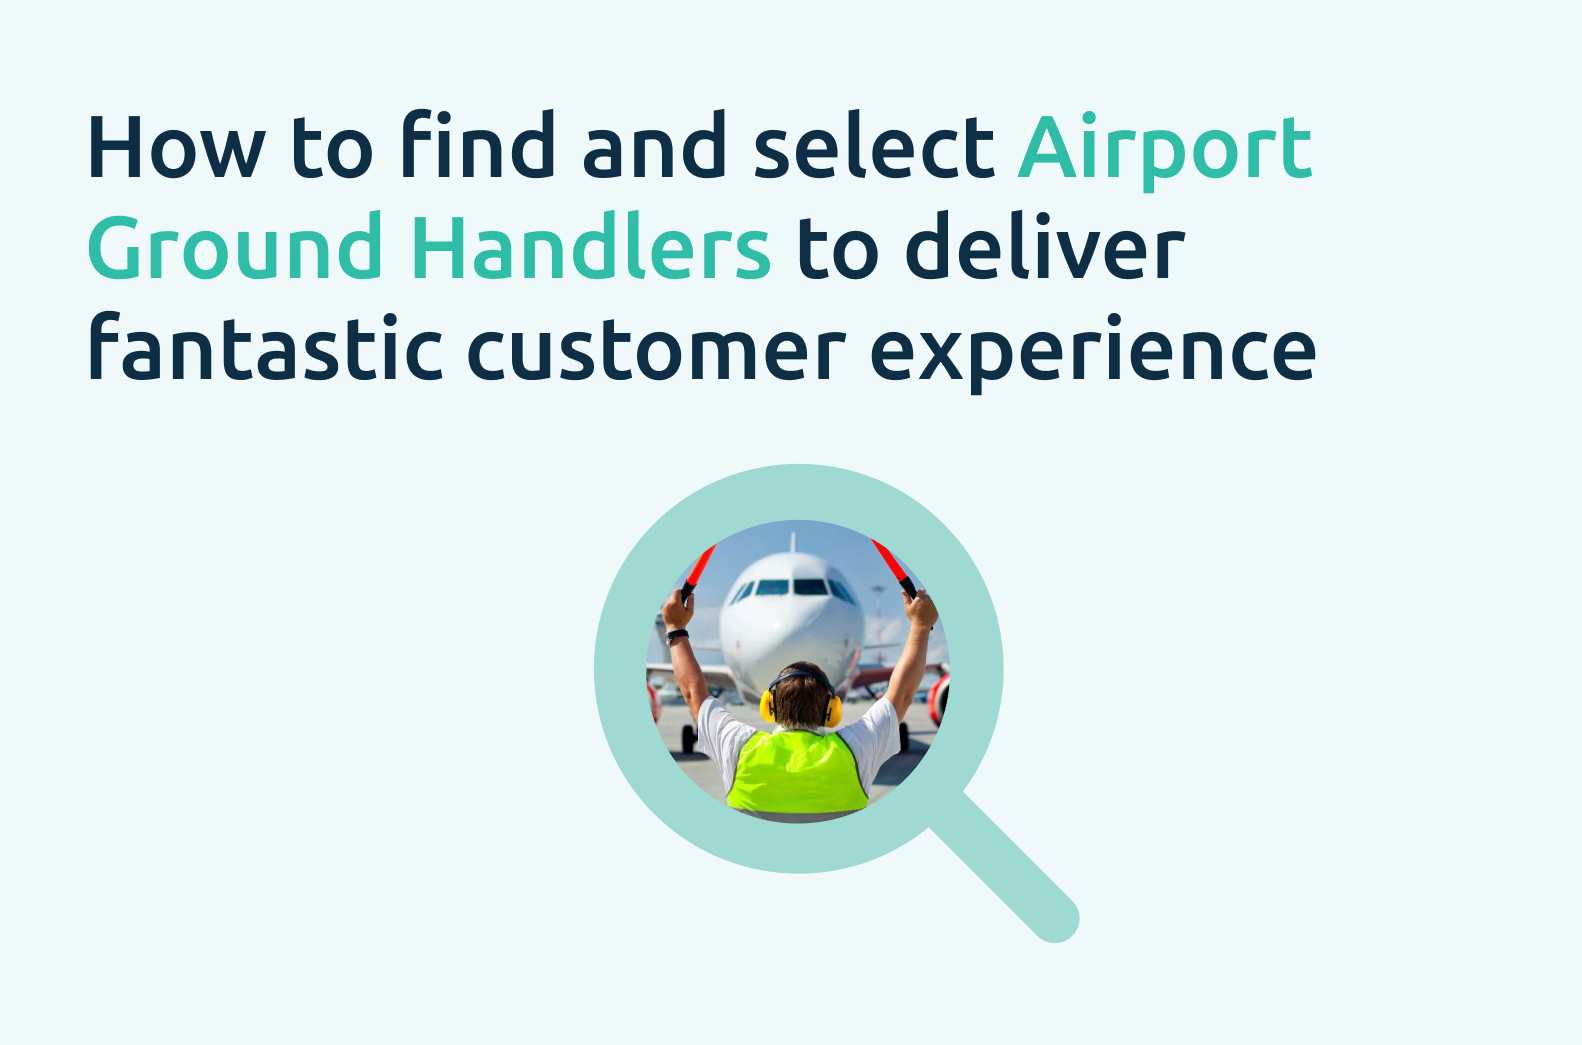 How to find and select Airport Ground Handlers to deliver fantastic customer experience…